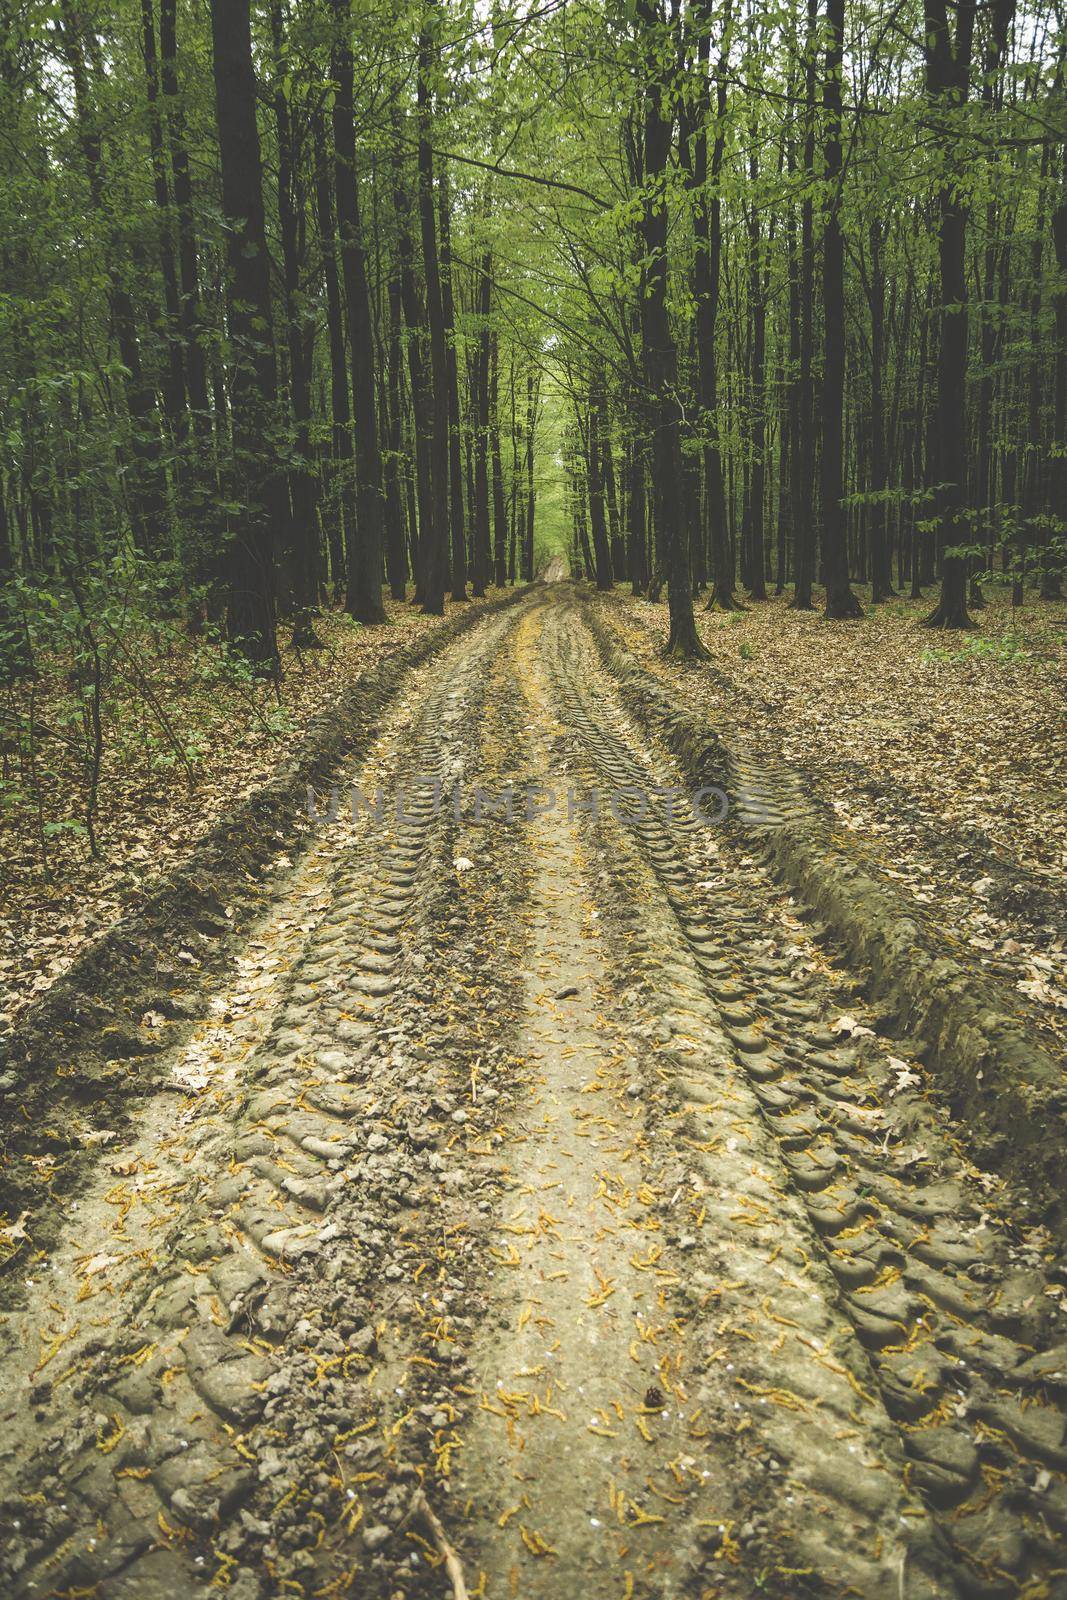 Clay road in the forest with wheel marks, spring view